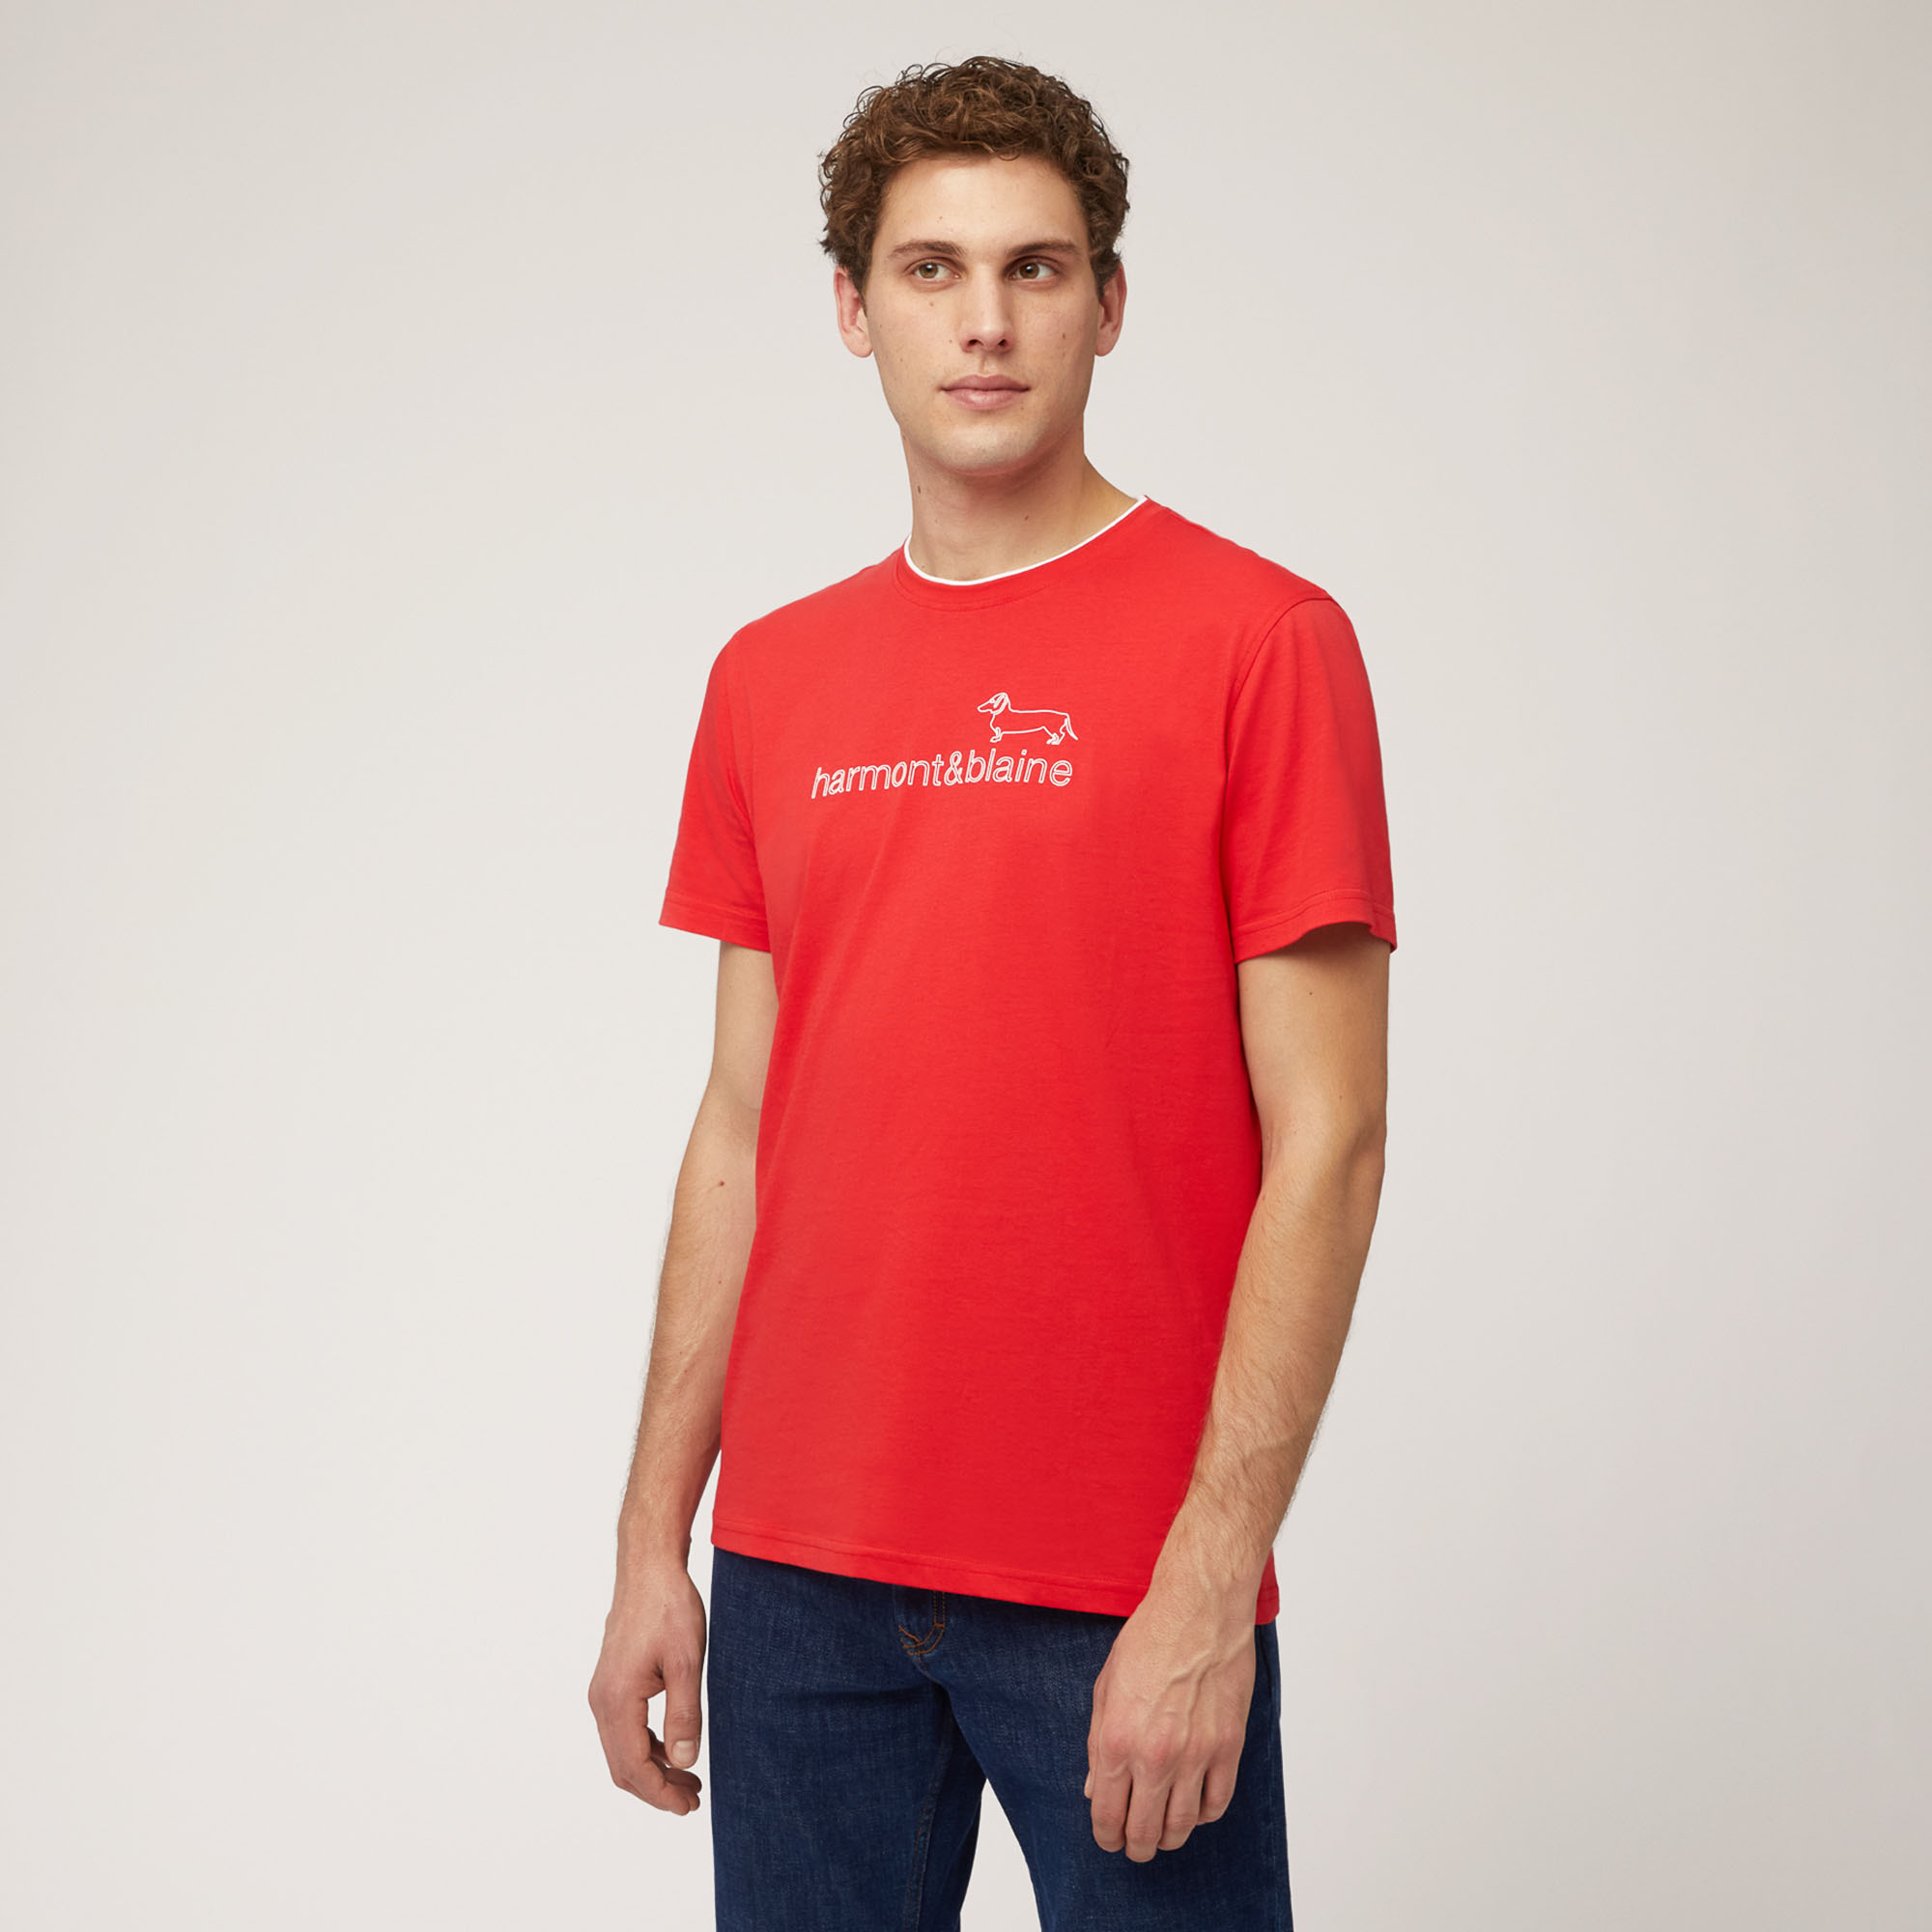 T-Shirt Con Stampa Logo, Rosso Chiaro, large image number 0